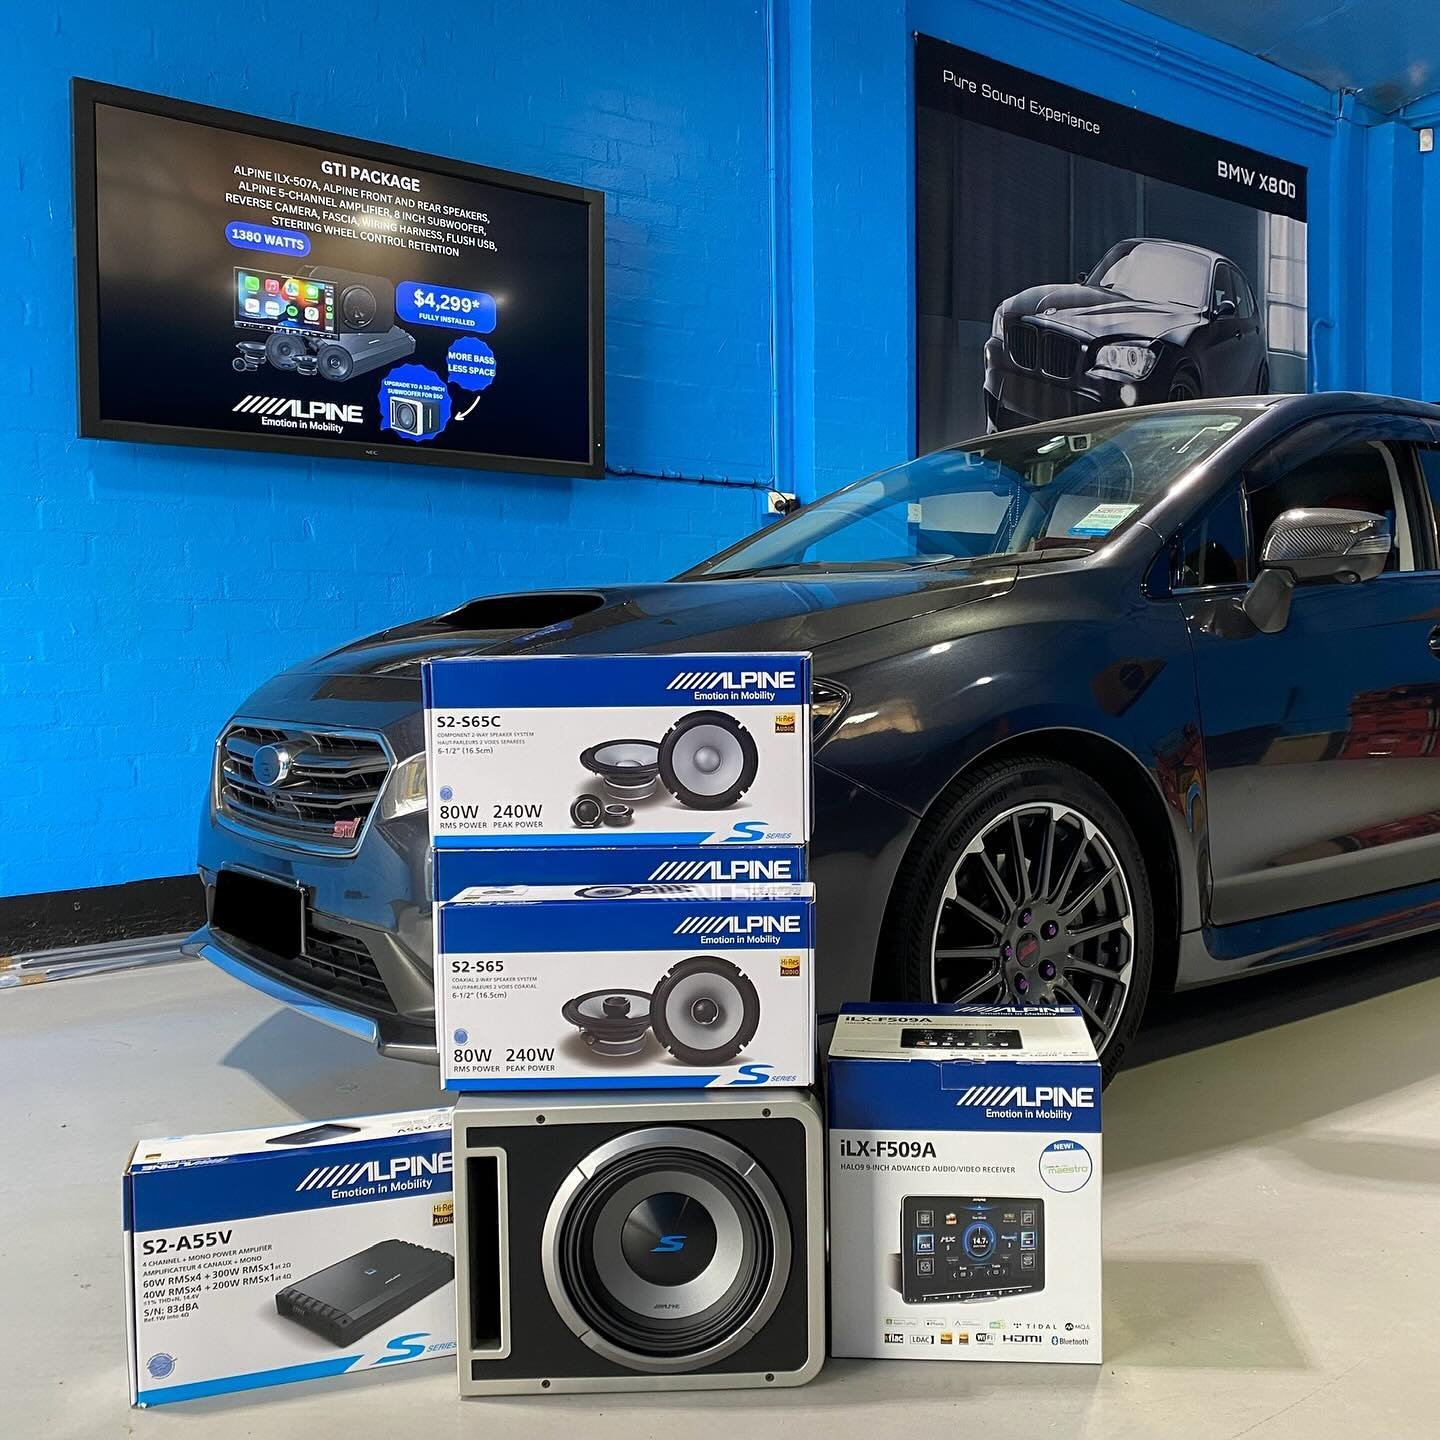 Another amazing No Limit package completed today. This customer decided to go all the way getting a GTI package with an upgraded subwoofer and larger 9-inch Apple CarPlay head unit to fully round out the new system. This complete package meant that a